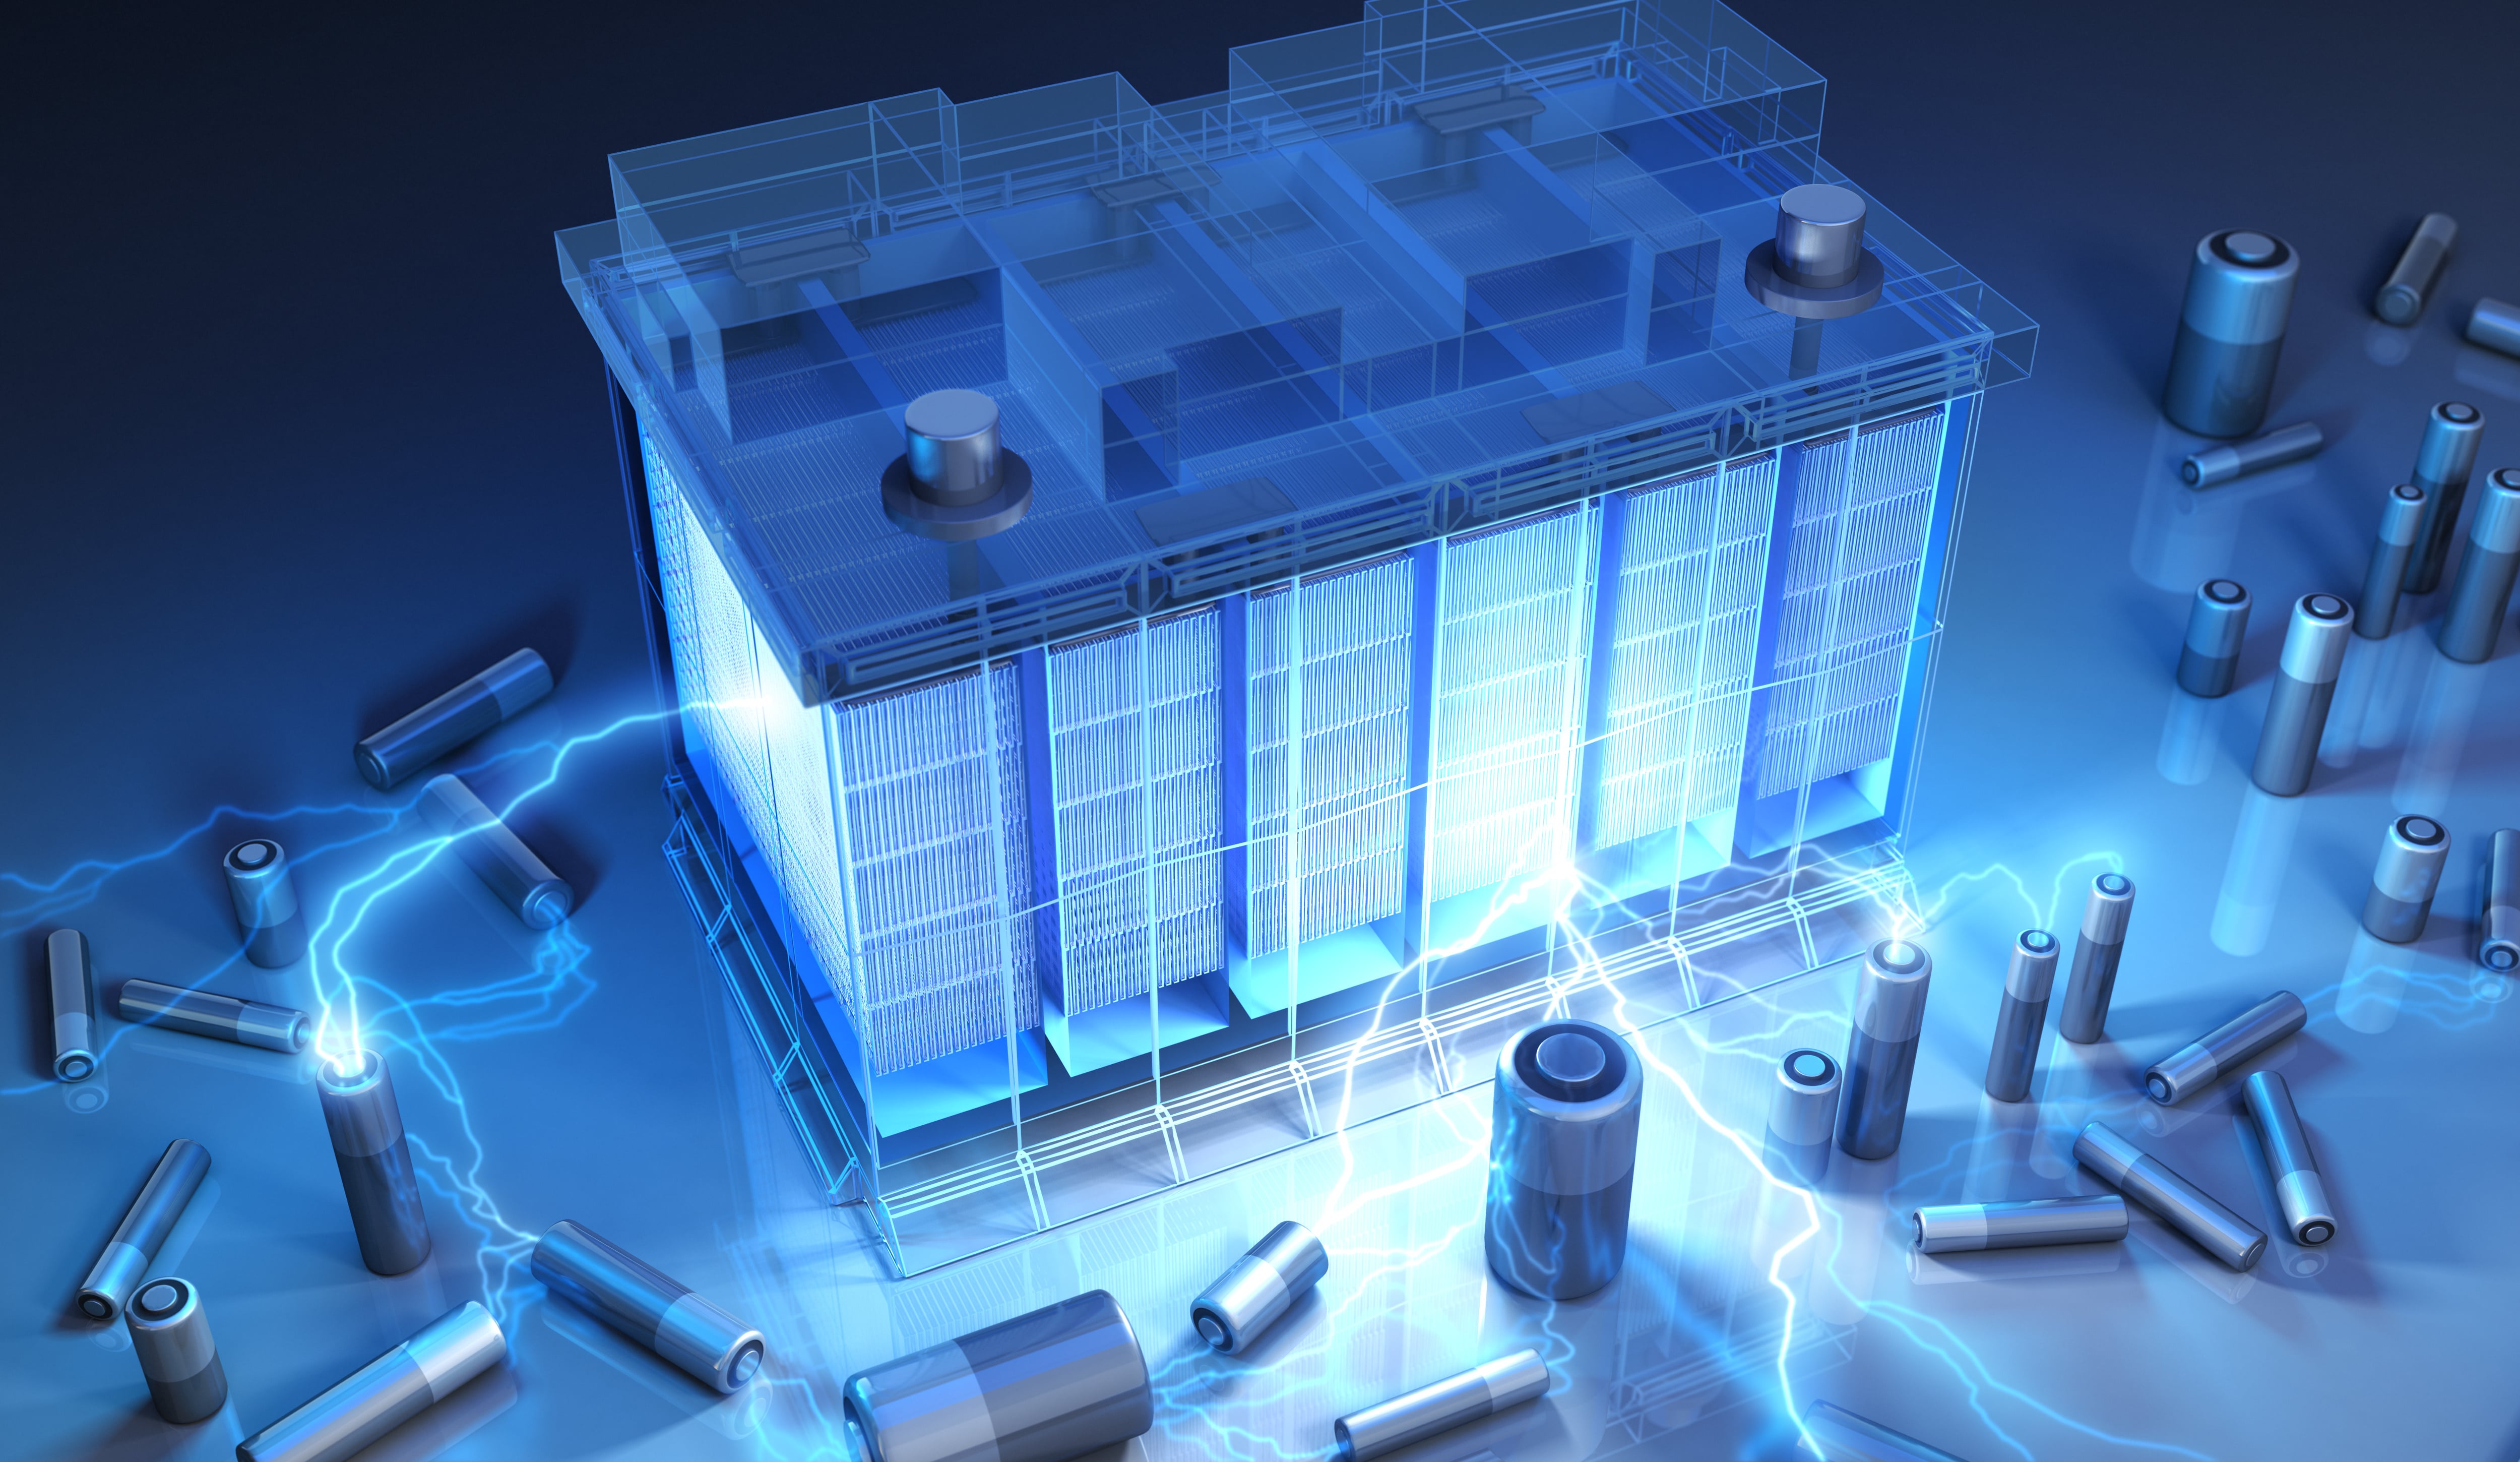 large lead acid battery lit up by bright blue glowing light showing synthesis of energy between small device batteries